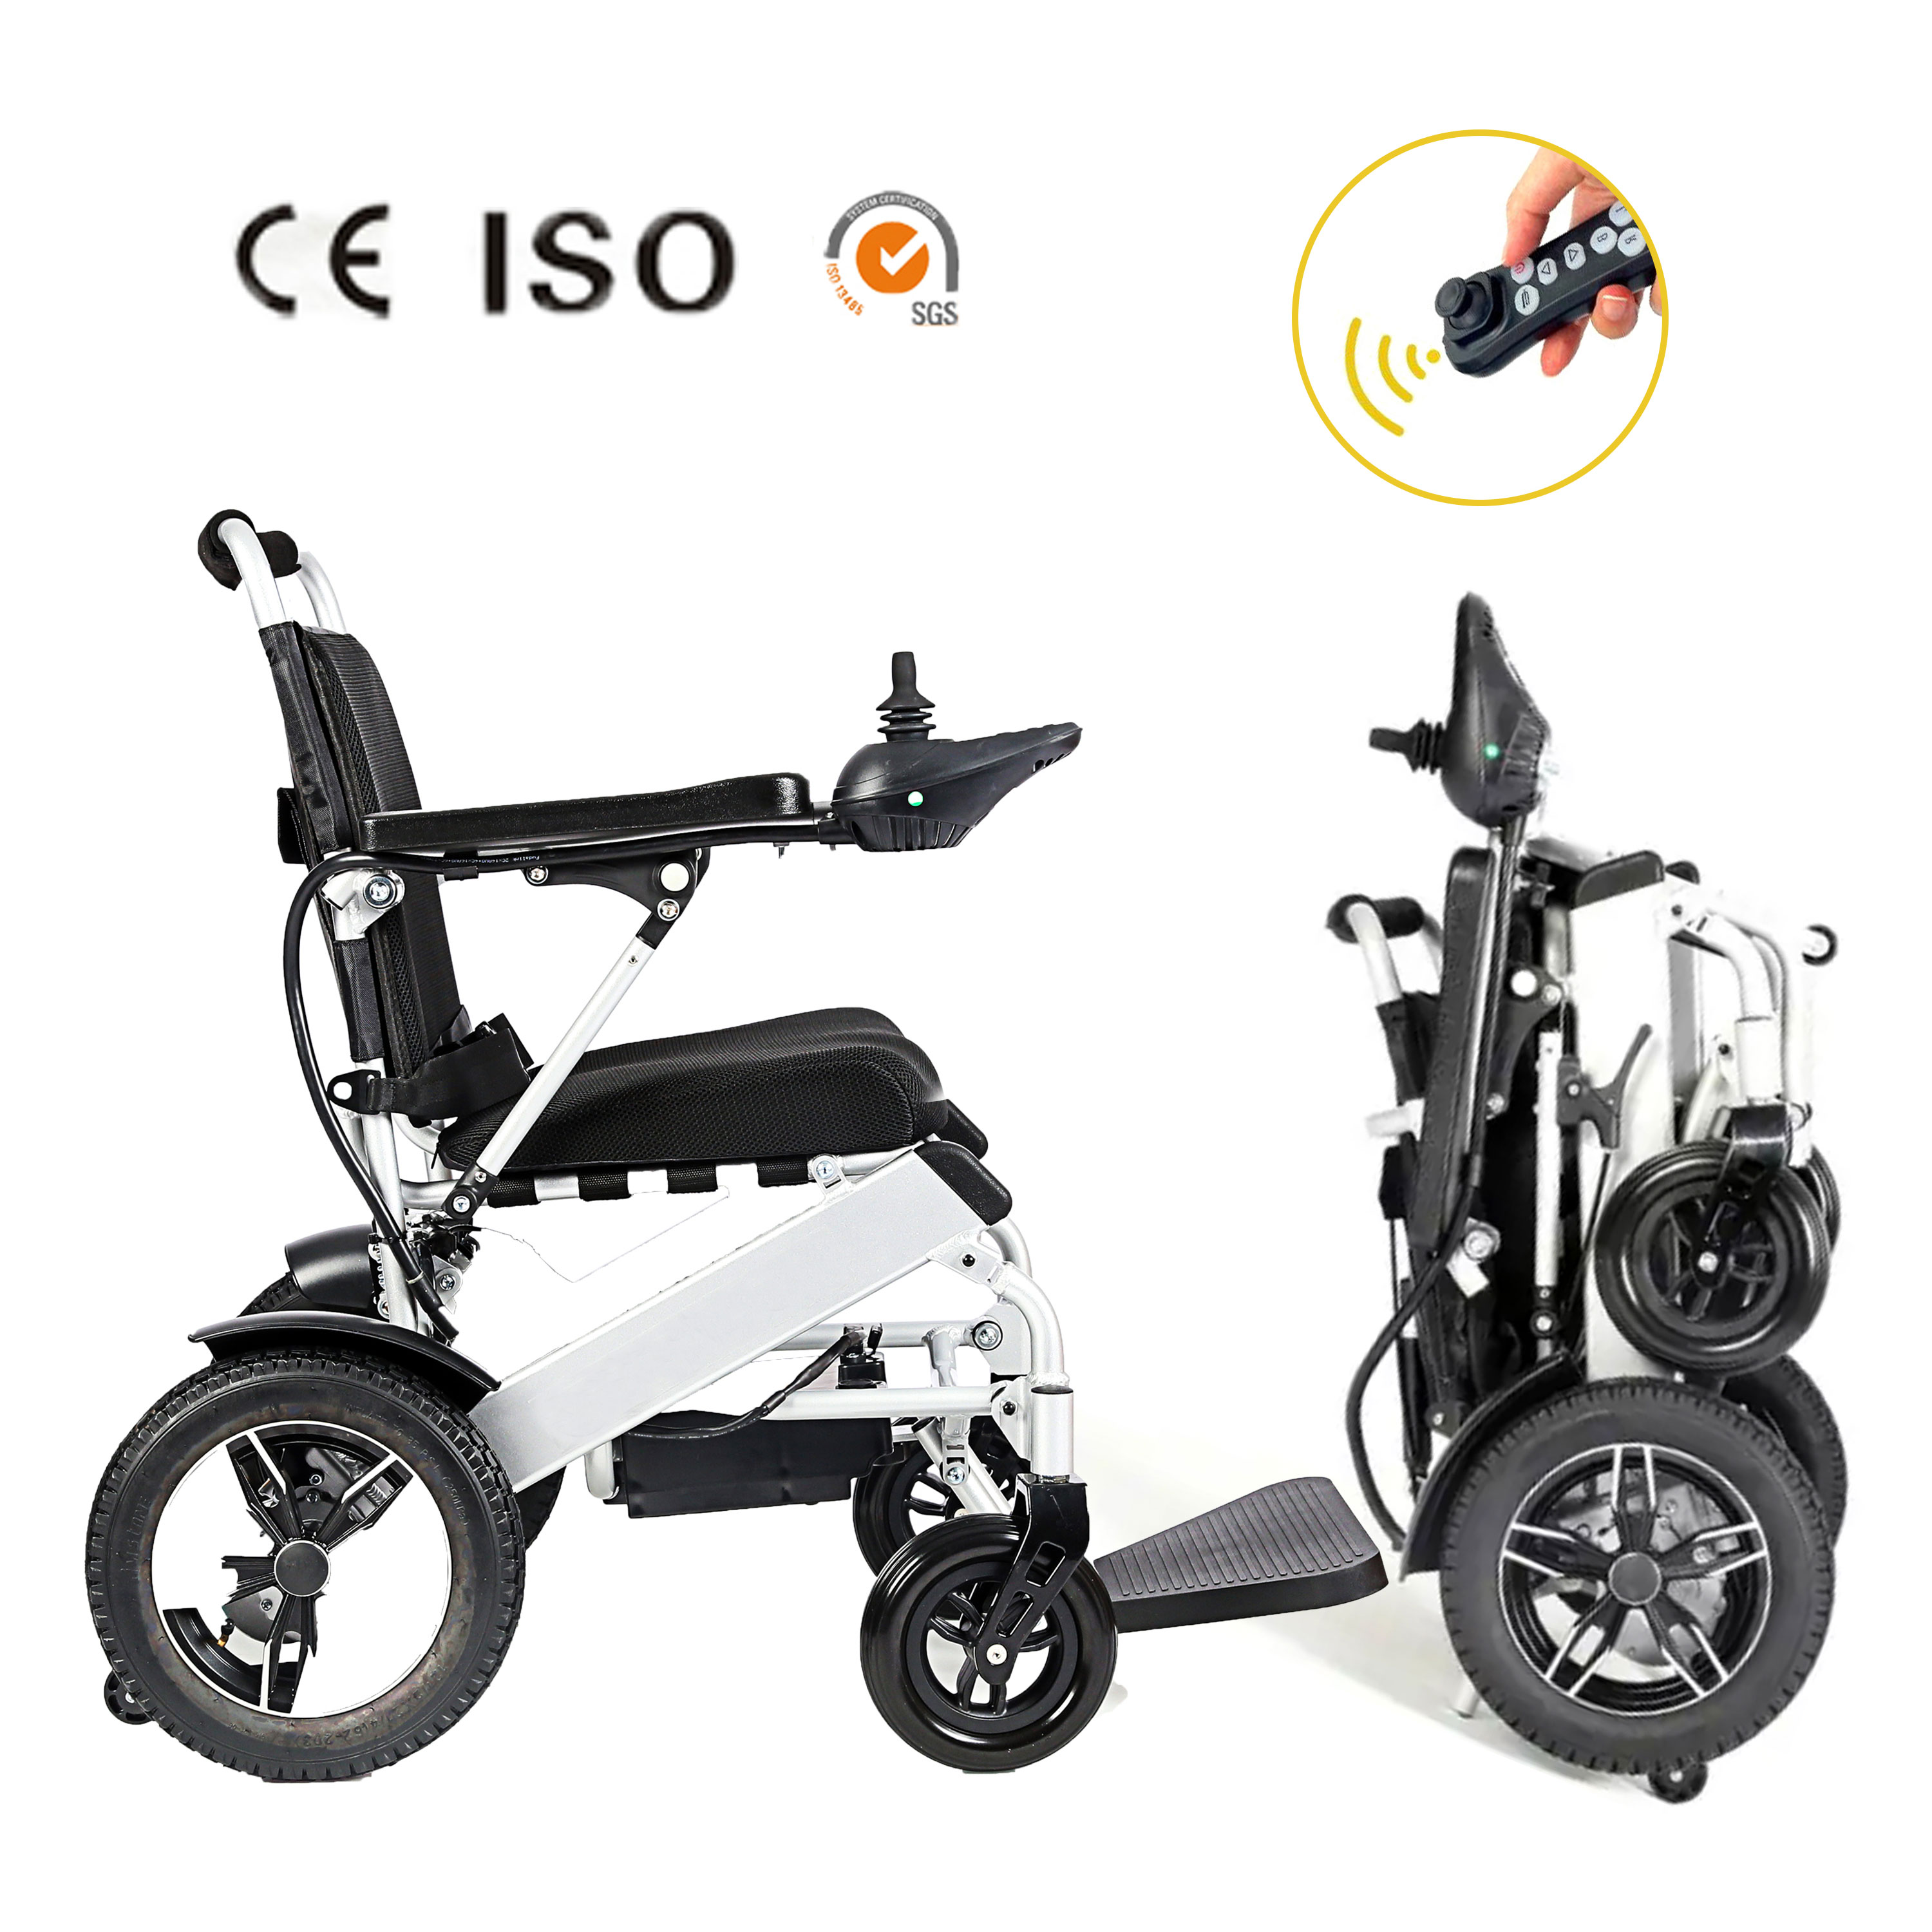 How can power wheelchairs be designed with the needs of different cultures and age groups in mind?